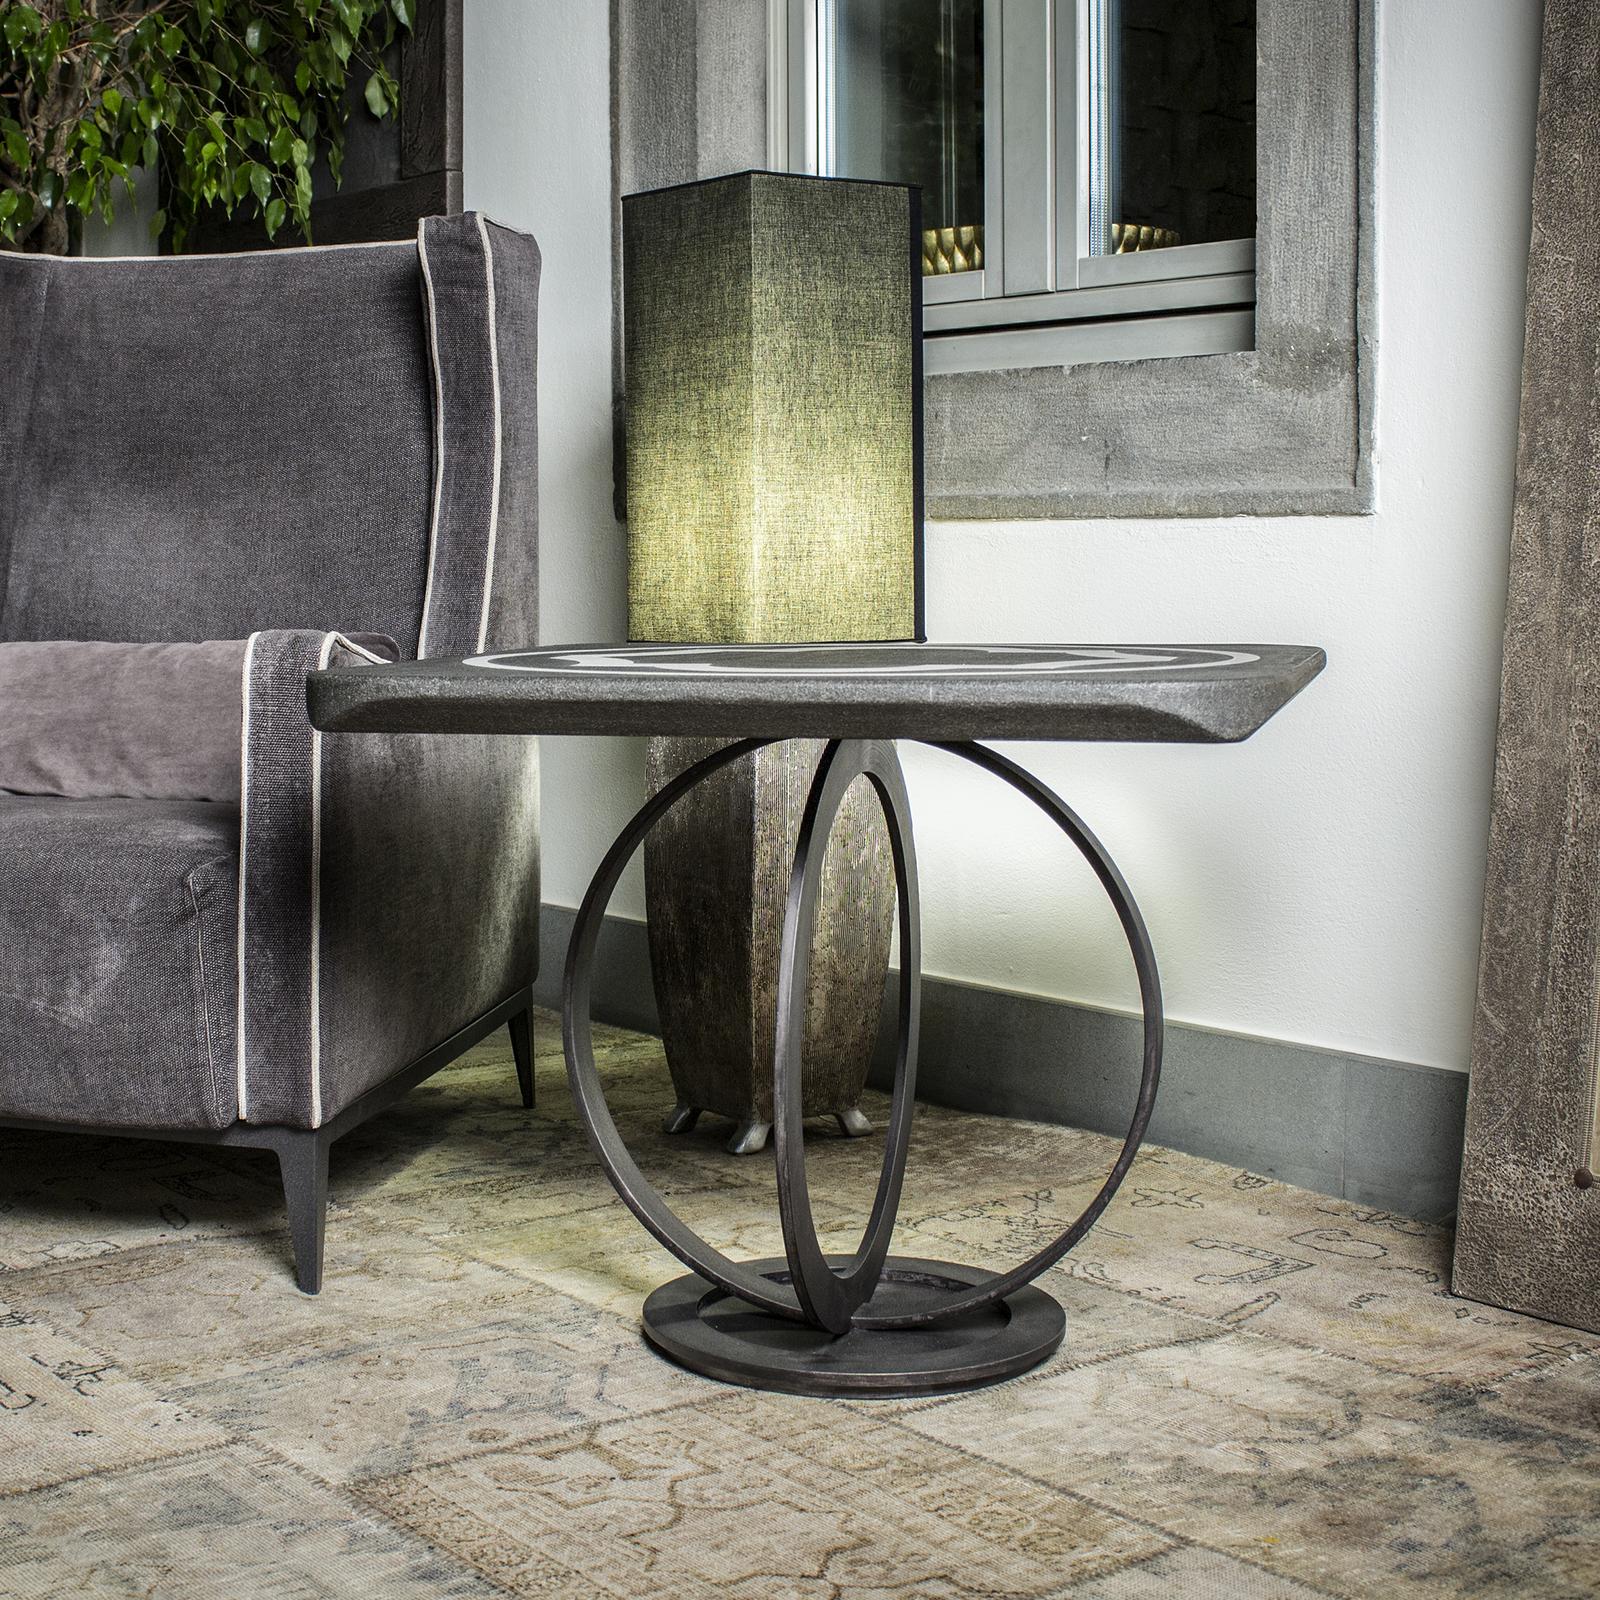 An exquisite piece of functional decor, this side table combines round and straight lines for a timeless silhouette that gets its inspiration from traditional decor (its name in Italian means 